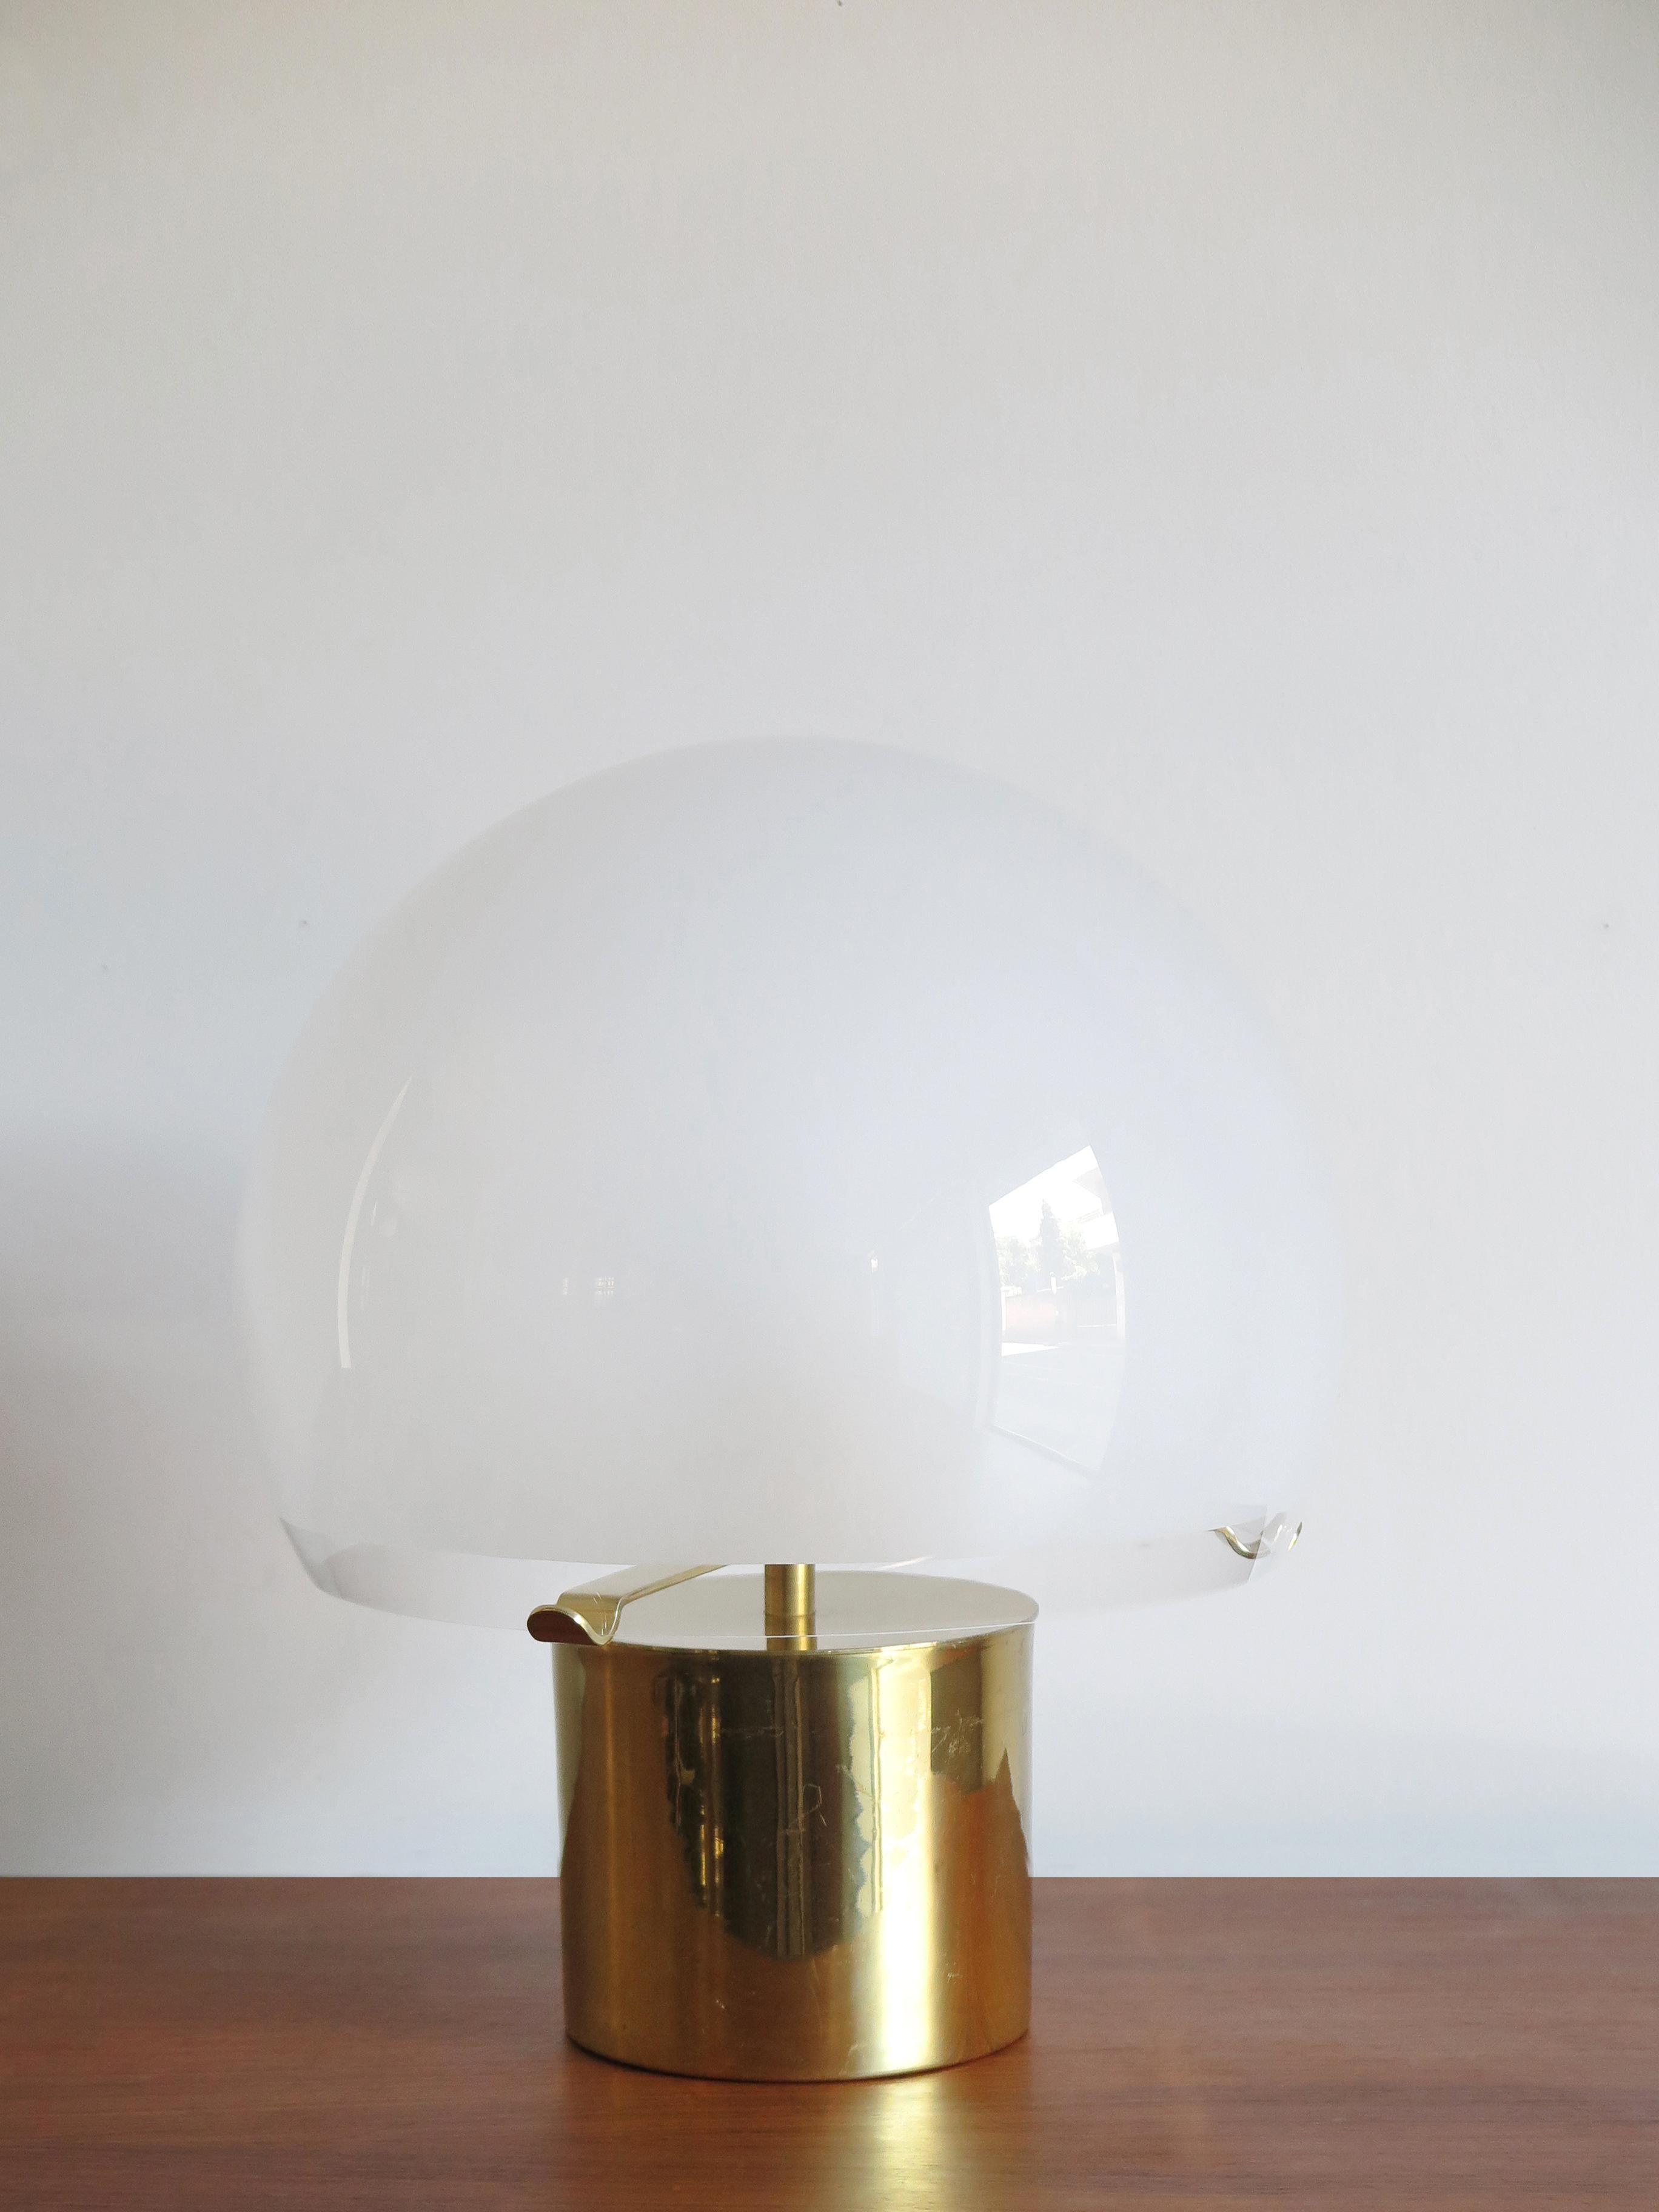 Italian Mid-Century Modern design table lamp model “LTA6 Porcino”
designed by Luigi Caccia Dominioni and produced by Azucena Milano from 1967, cylindrical brass base, blown glass diffuser frosted on the internal surface,